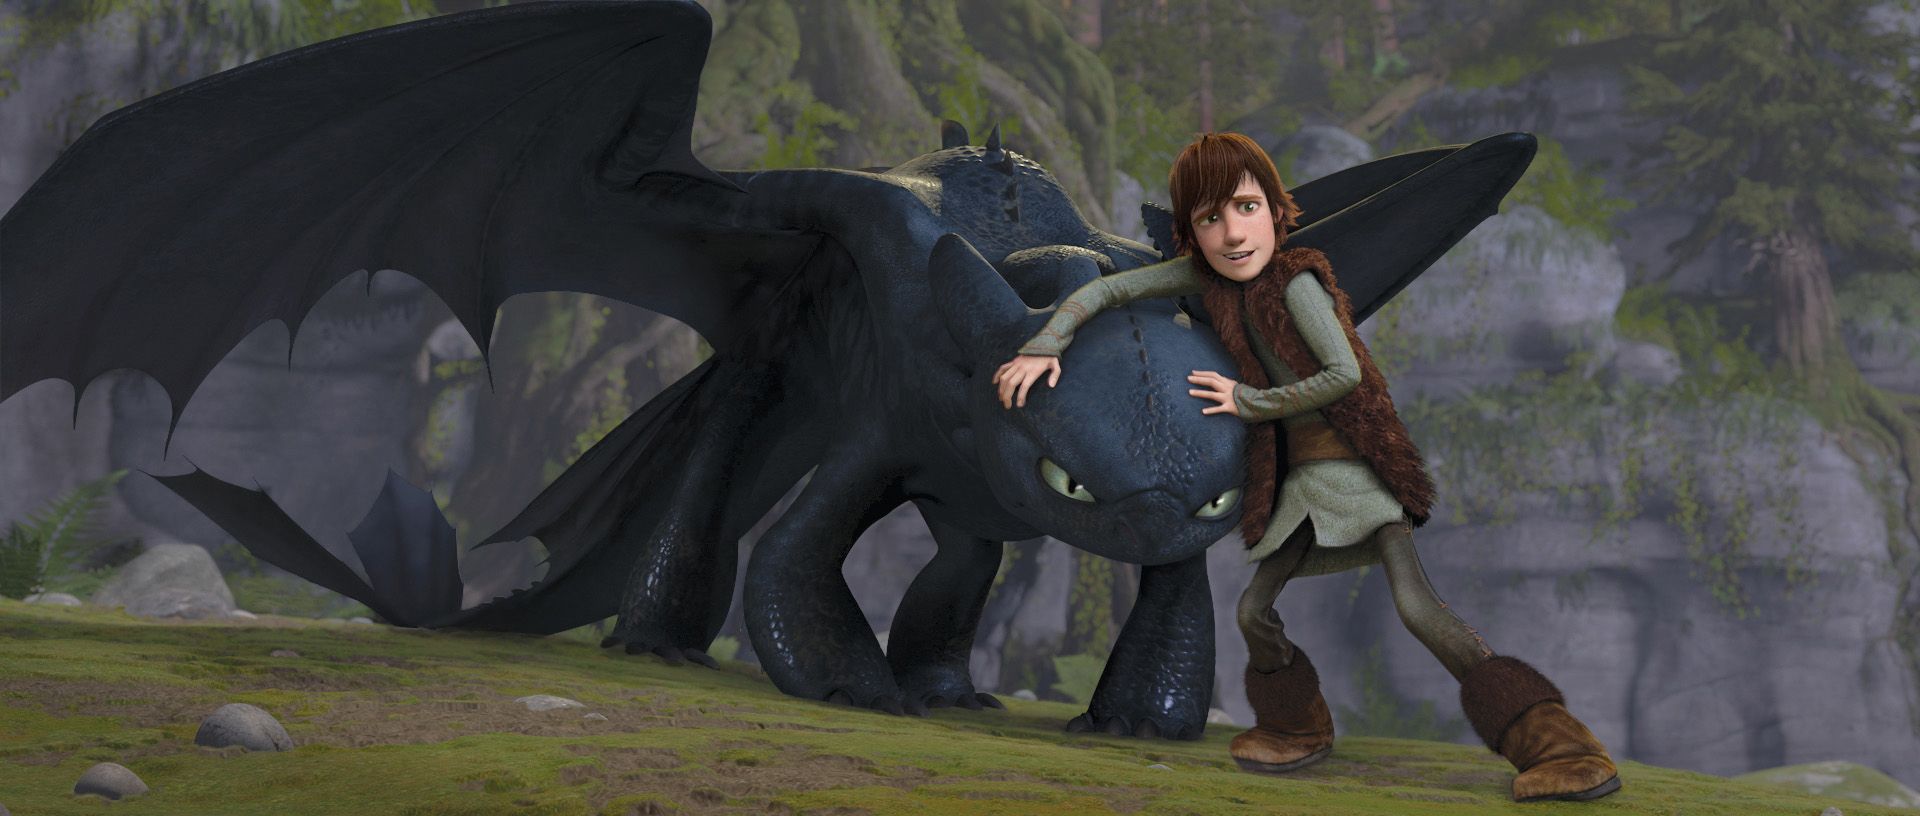 how-to-train-your-dragon-movie-image